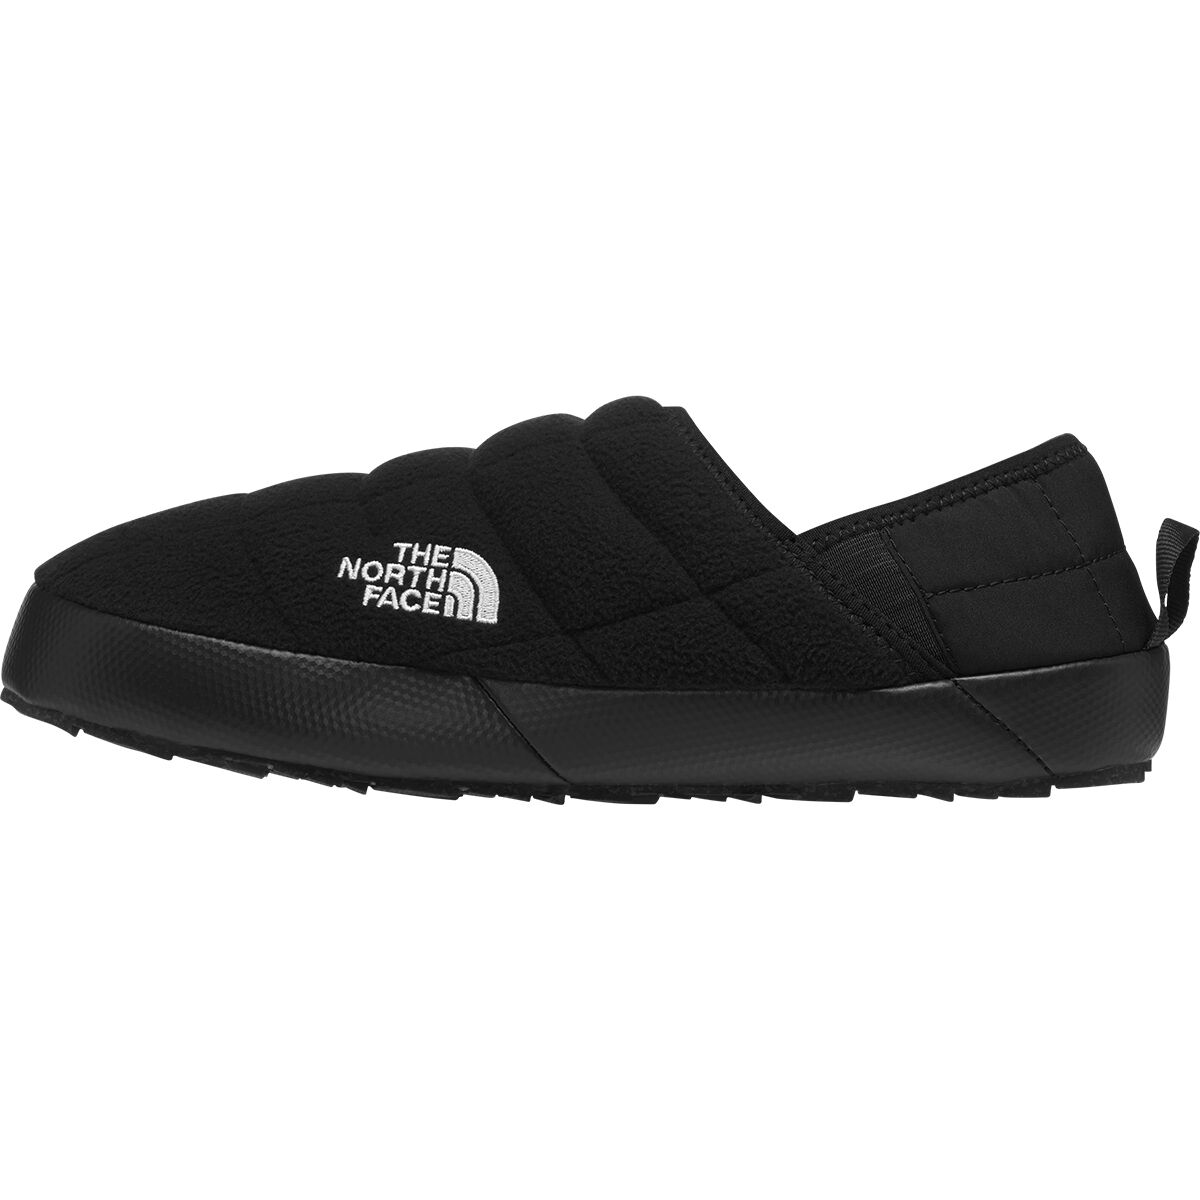 The North Face ThermoBall Traction Mule V Denali - Women's